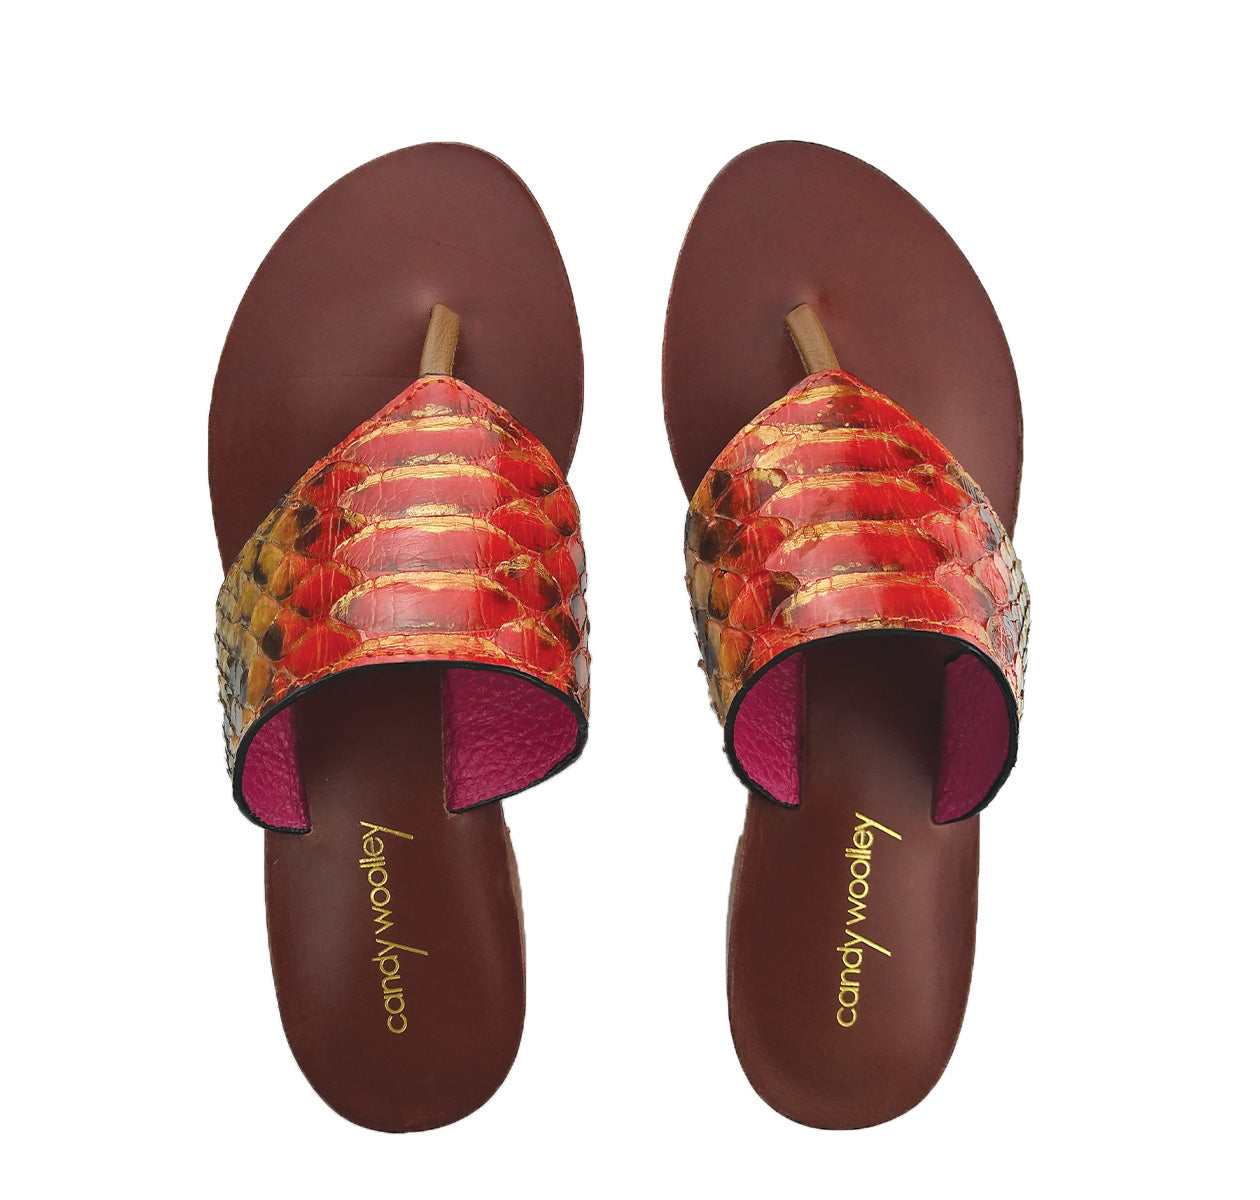 Genuine Python Orange and Gold Flat Thong Sandals. Size Available 7. [NEW: NON-SLIP & SOLE PROTECTOR]